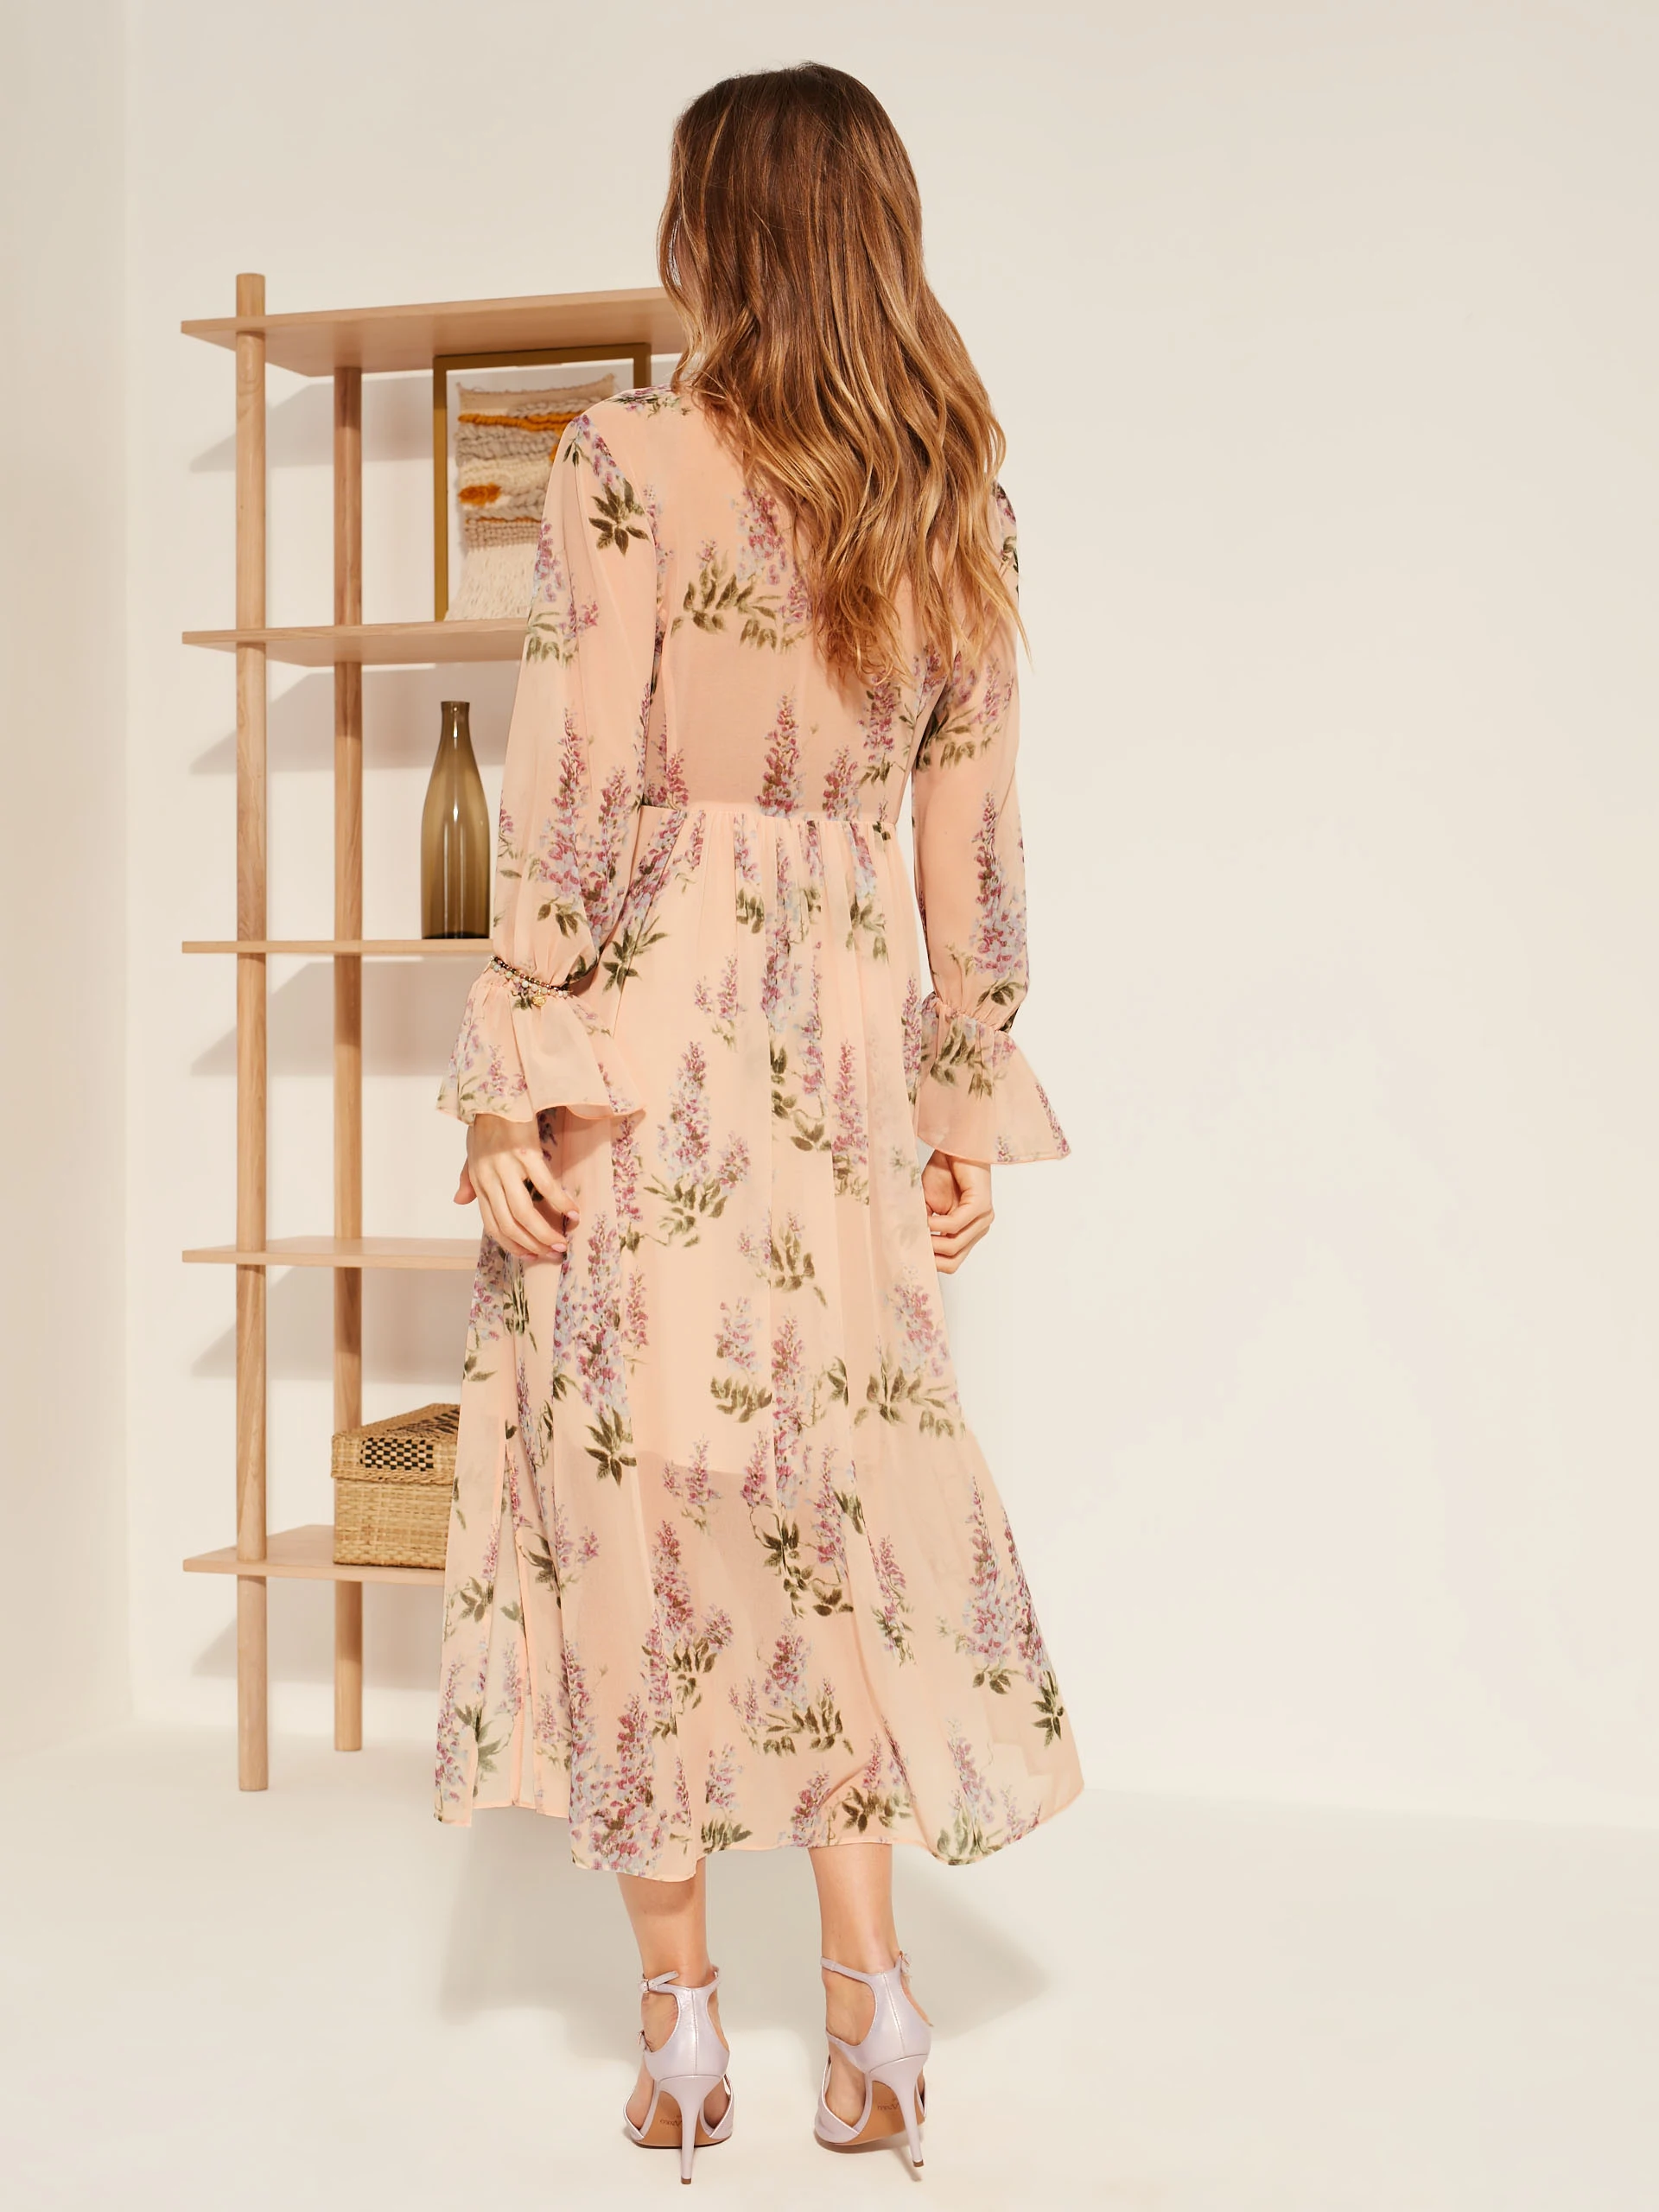 ETHEREAL FLORAL PATTERN DRESS